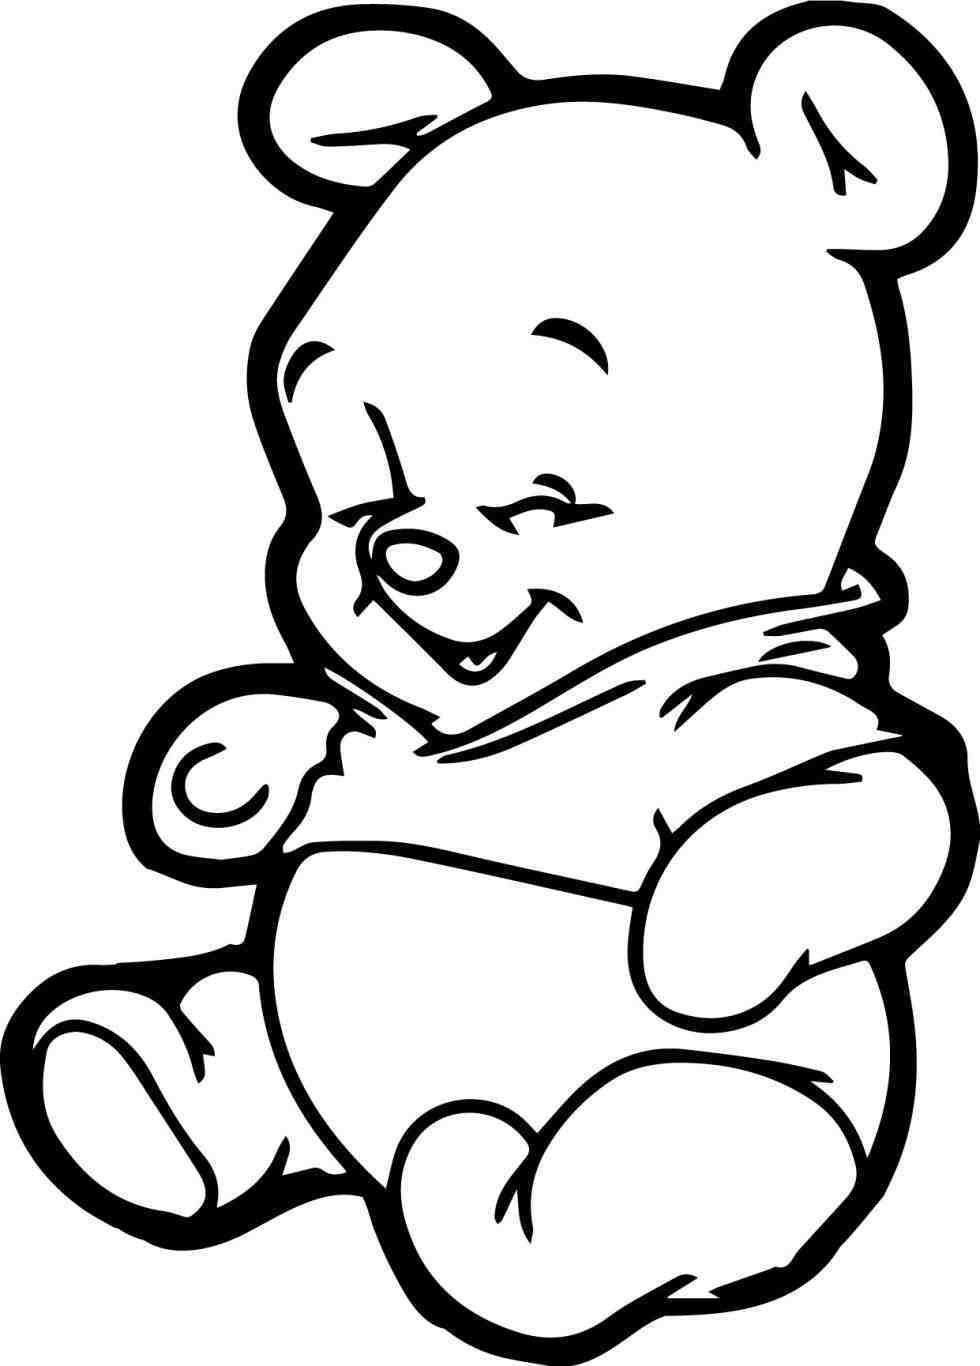 Winnie The Pooh Drawings With Color / Winnie The Pooh Line Drawing at